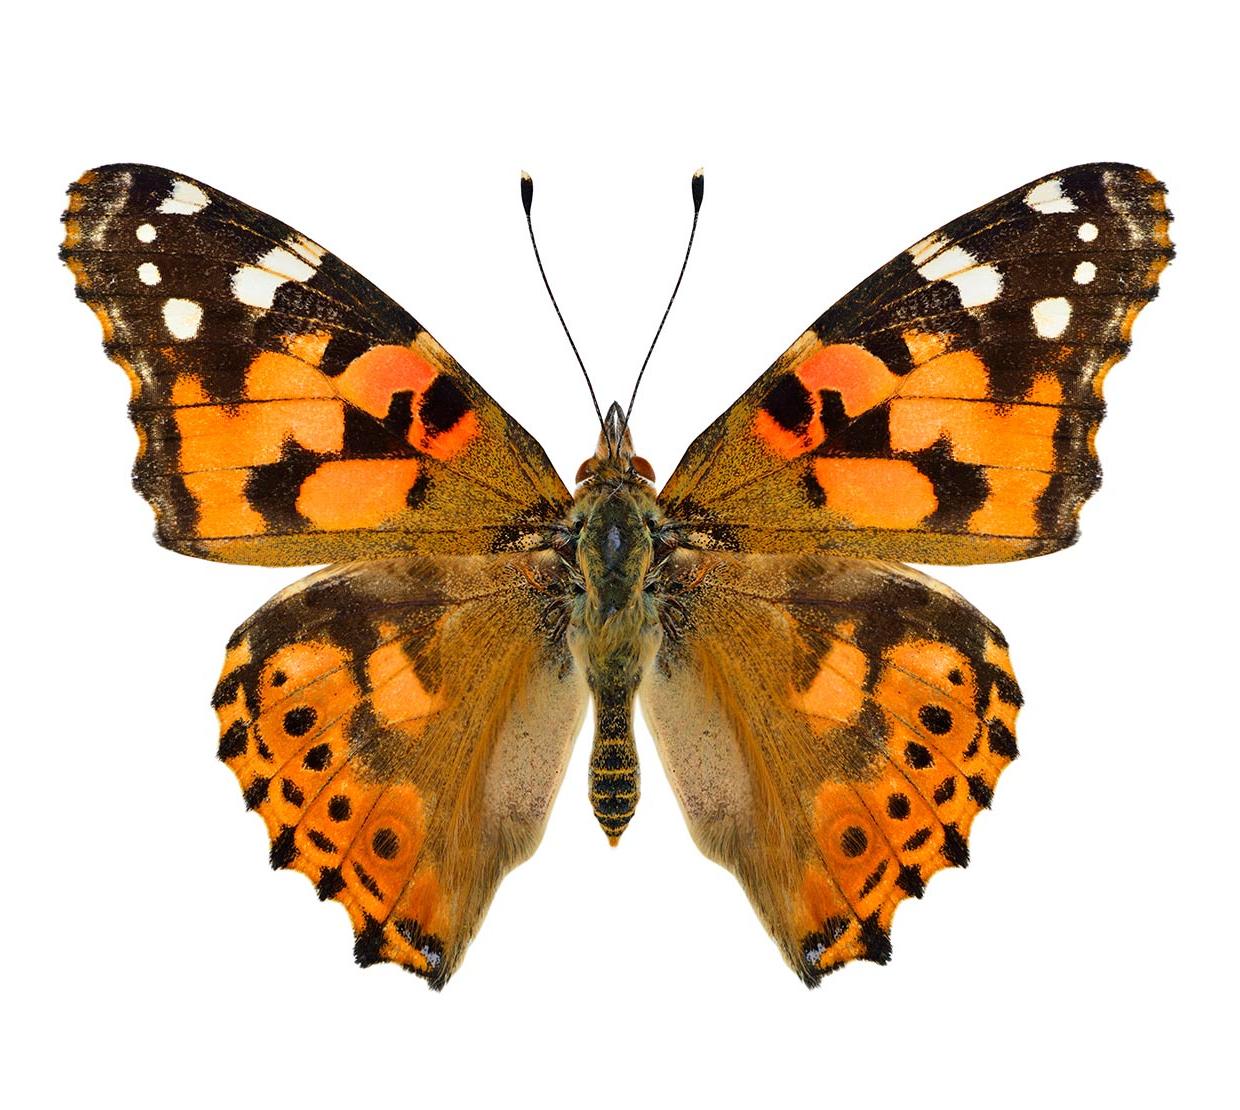 Painted lady butterfly in front of white backdrop